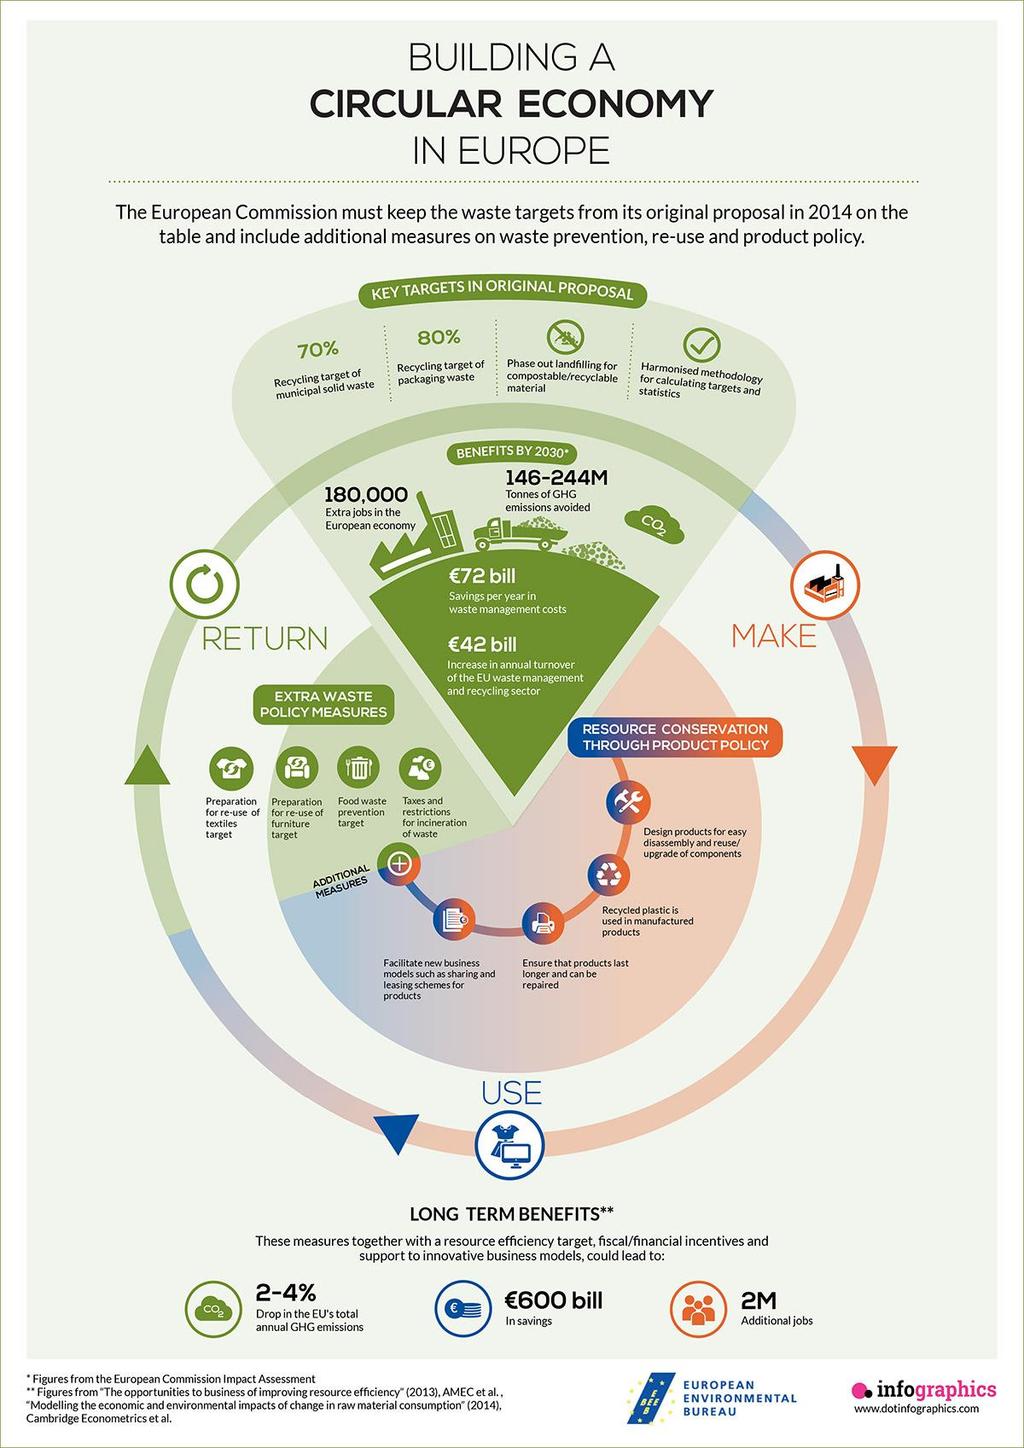 CIRCULAR ECONOMY AND EXAMPLES